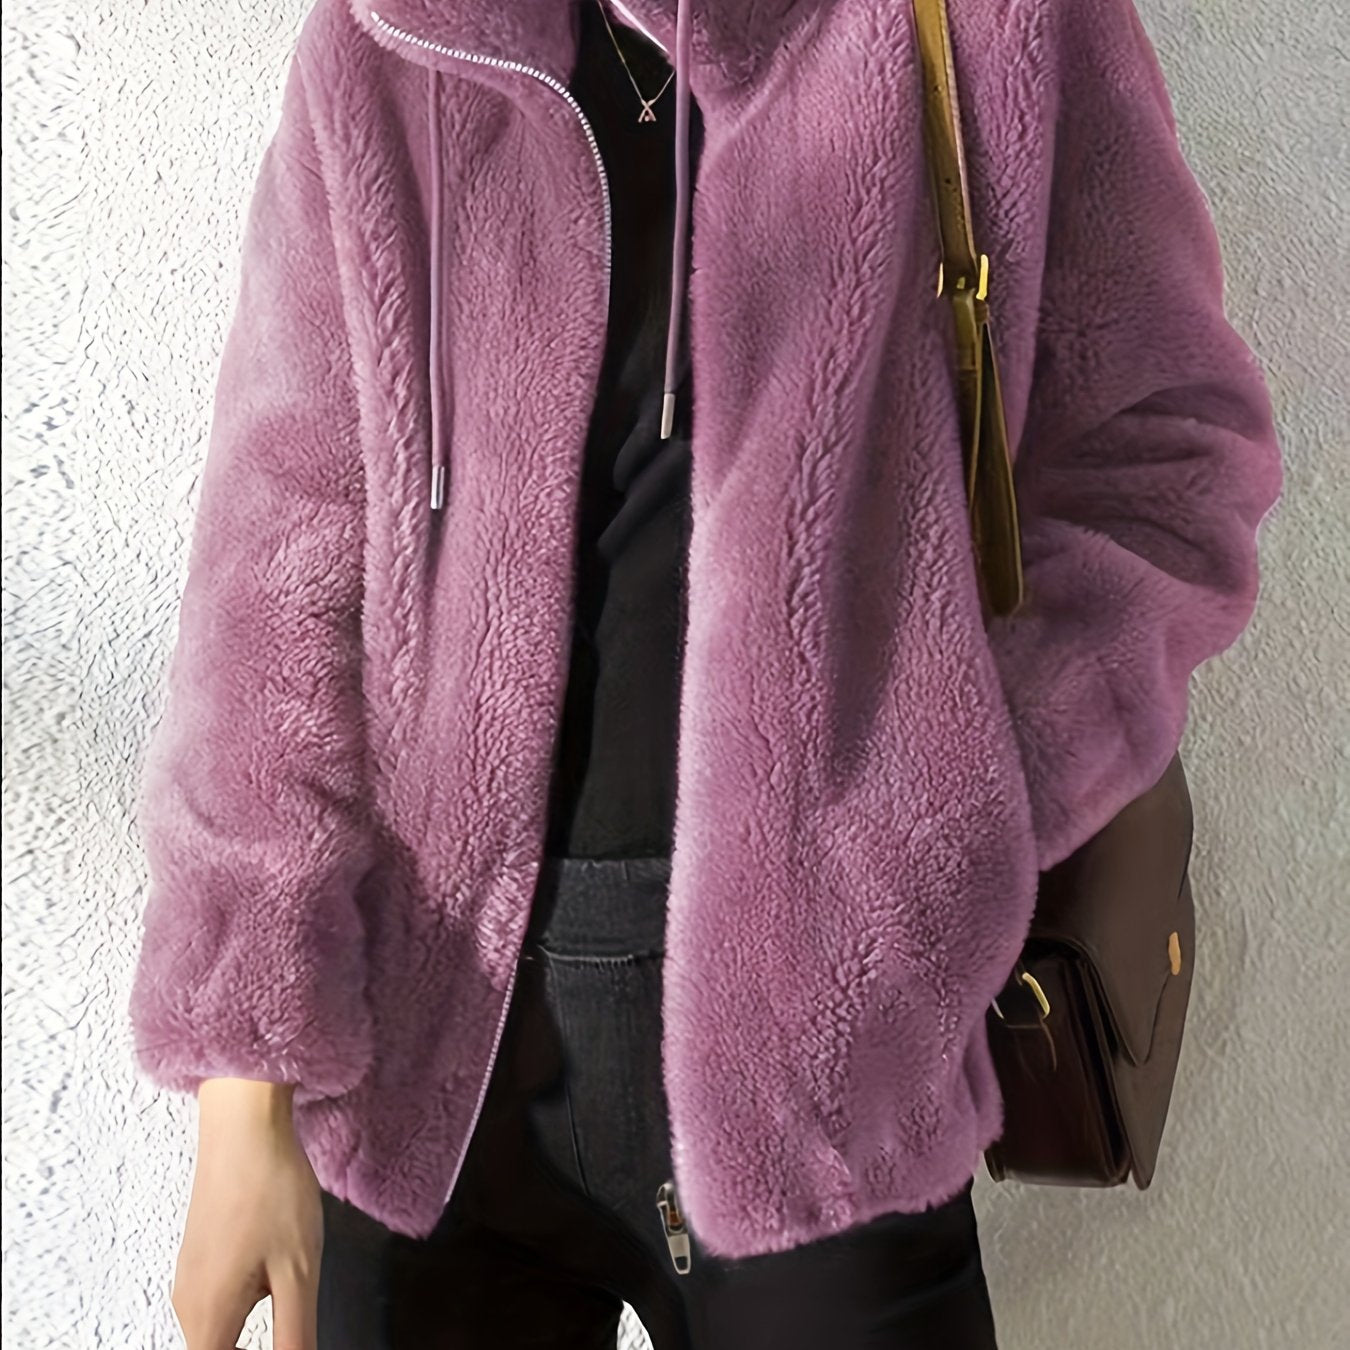 Drawstring Teddy Coat, Casual Zip Up Long Sleeve Warm Outerwear, Women's Clothing